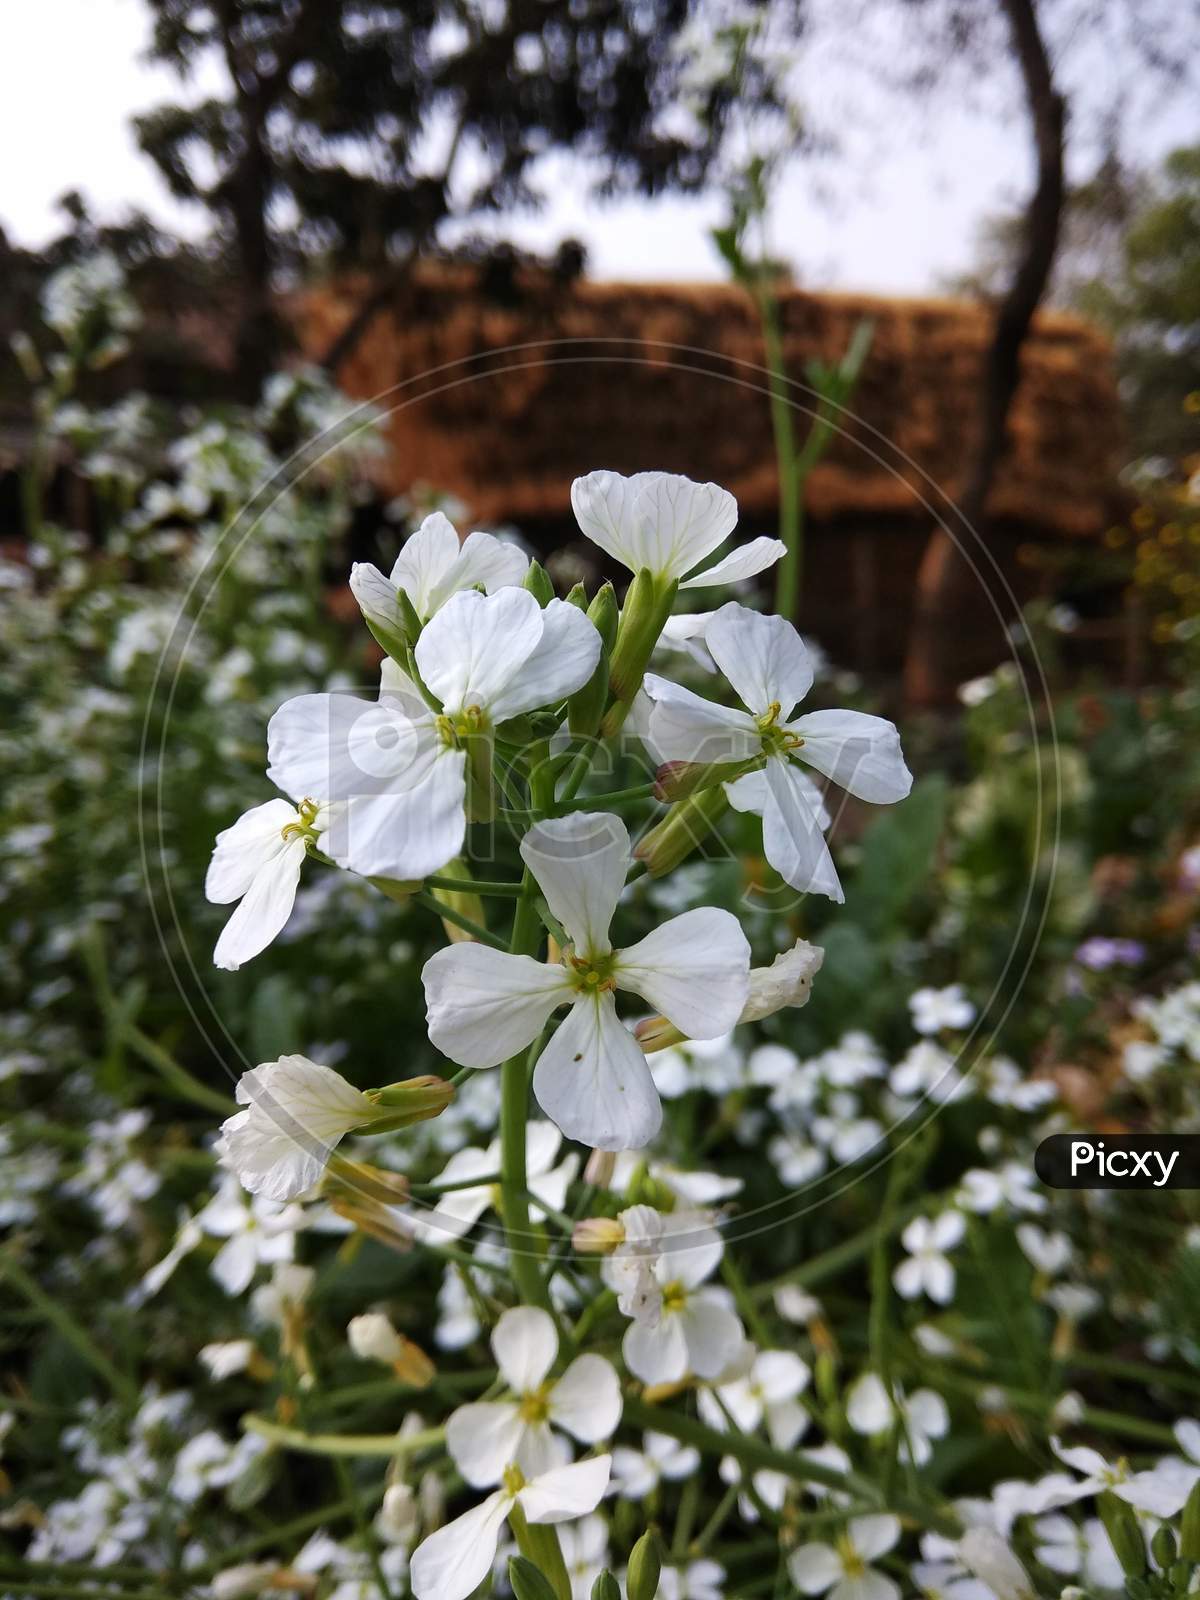 White Radish flower which are petite blooms consisting of four petals forming the shape of a Greek cross attached to four yellow stamens and a thin green stem